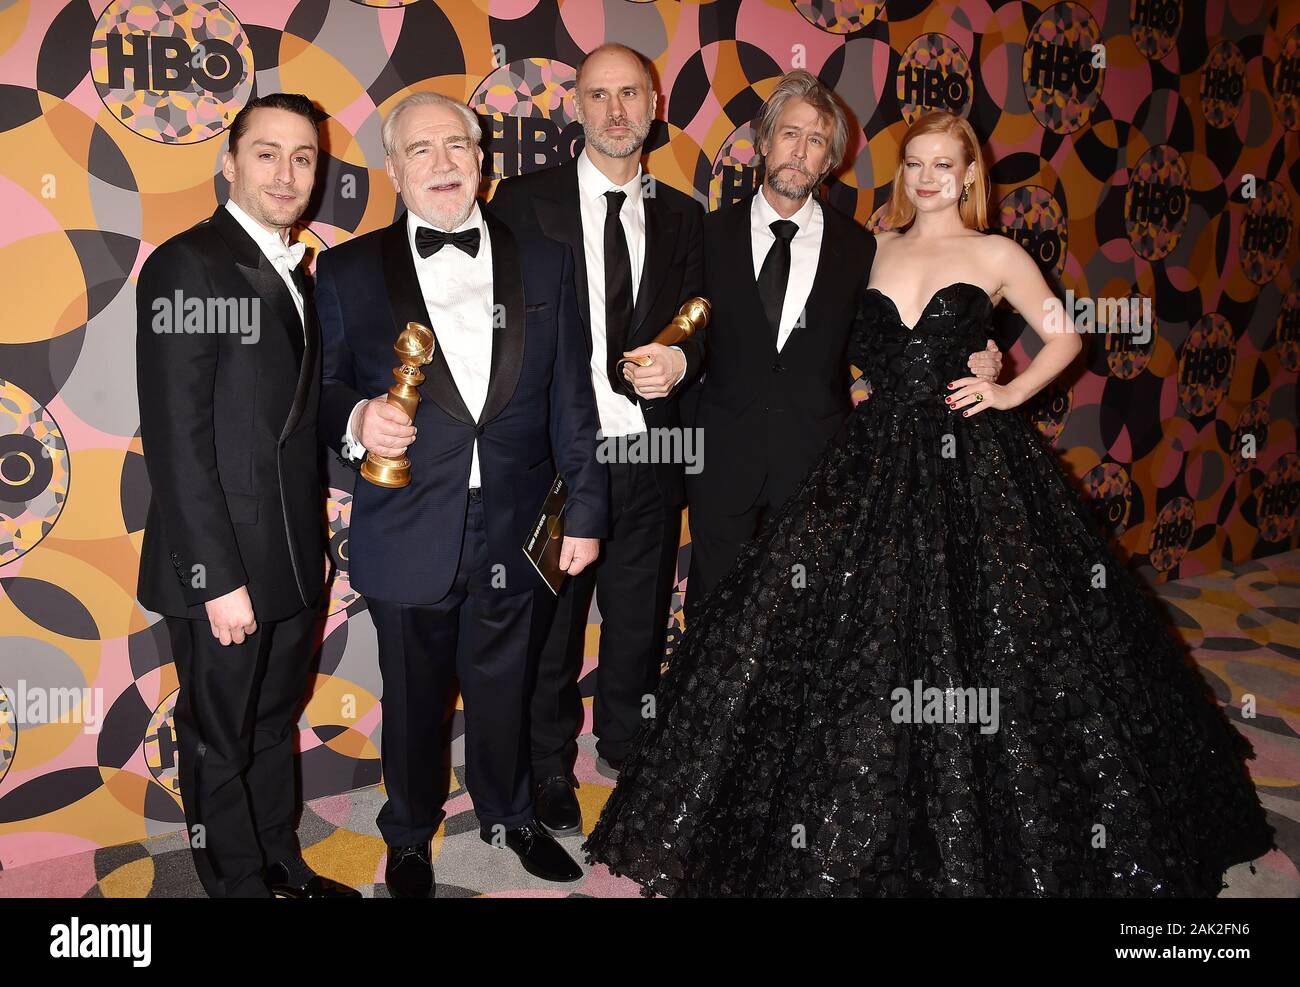 BEVERLY HILLS, CA - JANUARY 05: (L-R) Kieran Culkin, Brian Cox, Jesse Armstrong, Alan Ruck and Sarah Snook attend HBO's Official Golden Globes After Party at Circa 55 Restaurant on January 05, 2020 in Los Angeles, California. Stock Photo